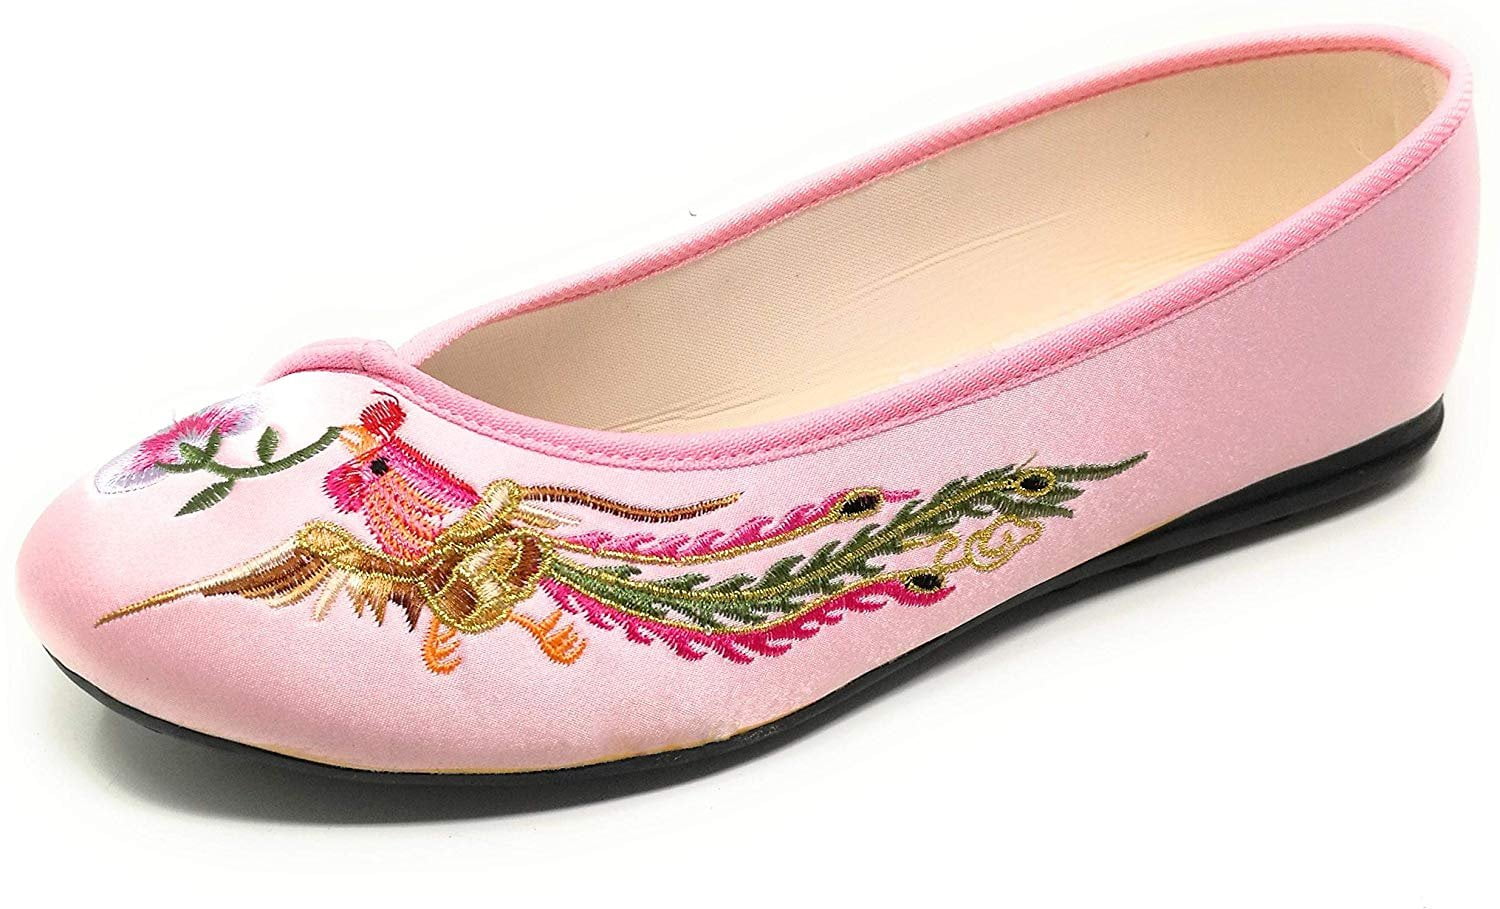 RAINED-Women Cloth Shoes Embroidered Chinese Style Loafers Shoes Flower Embroidery Ballet Round Toe Flats Shoes